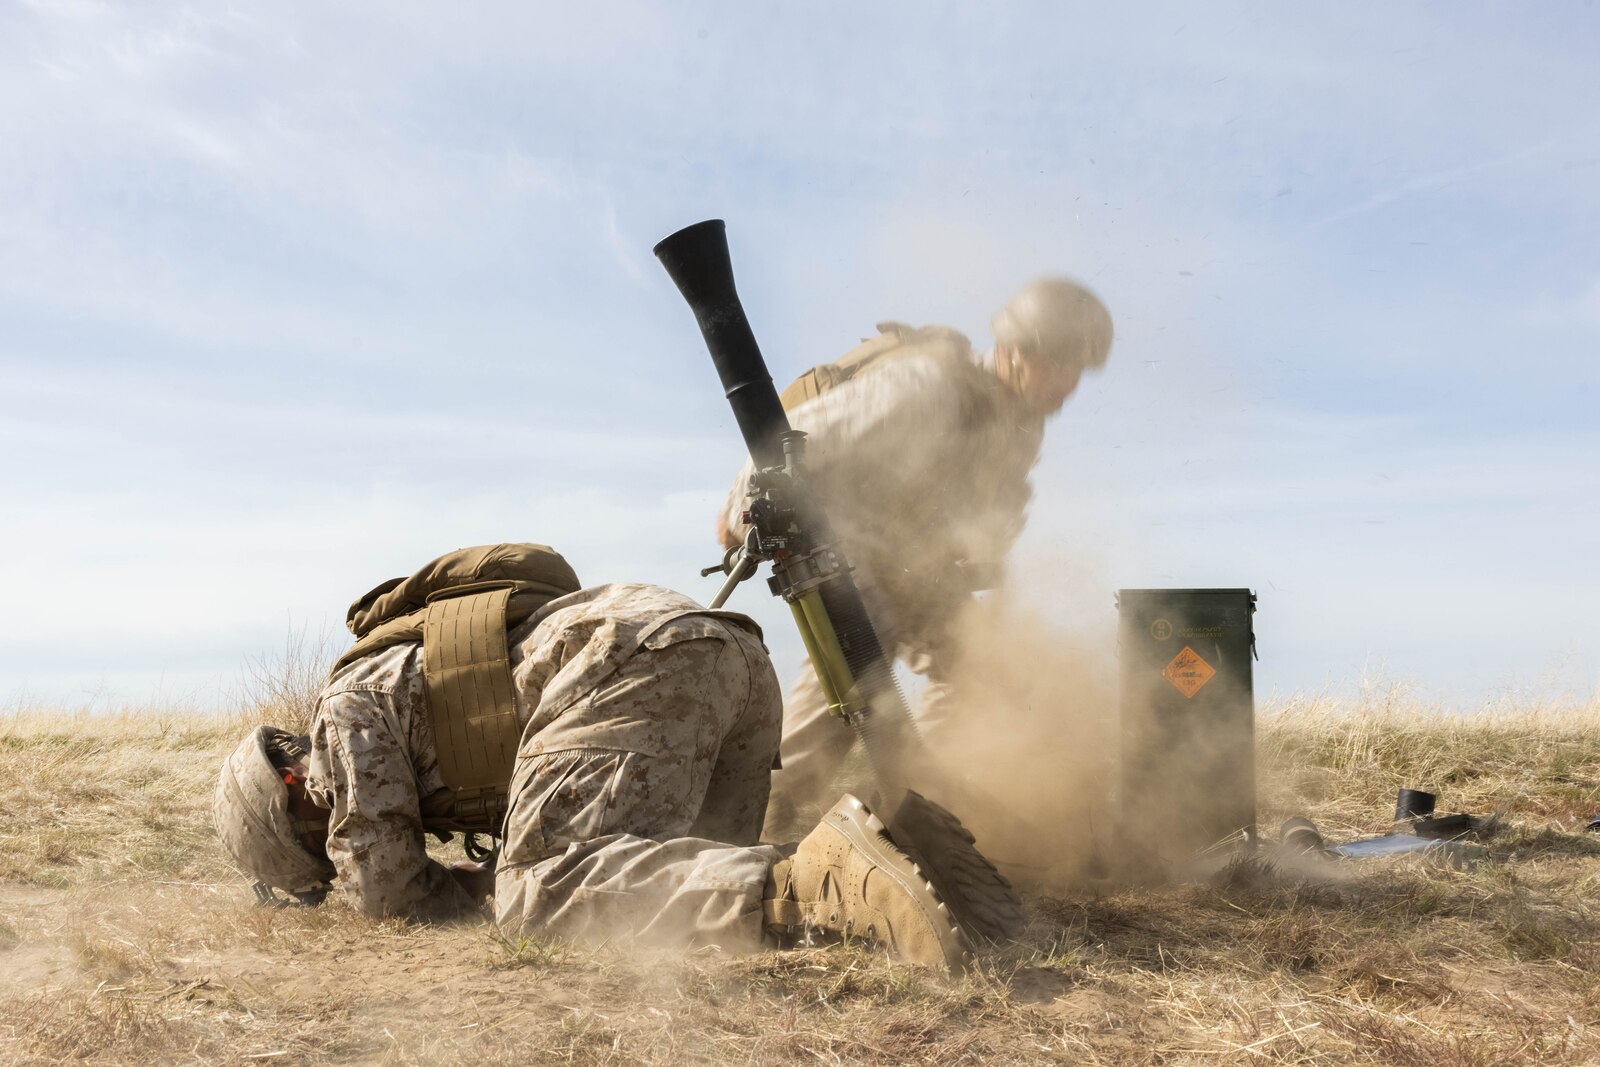 Best Mortar Competition